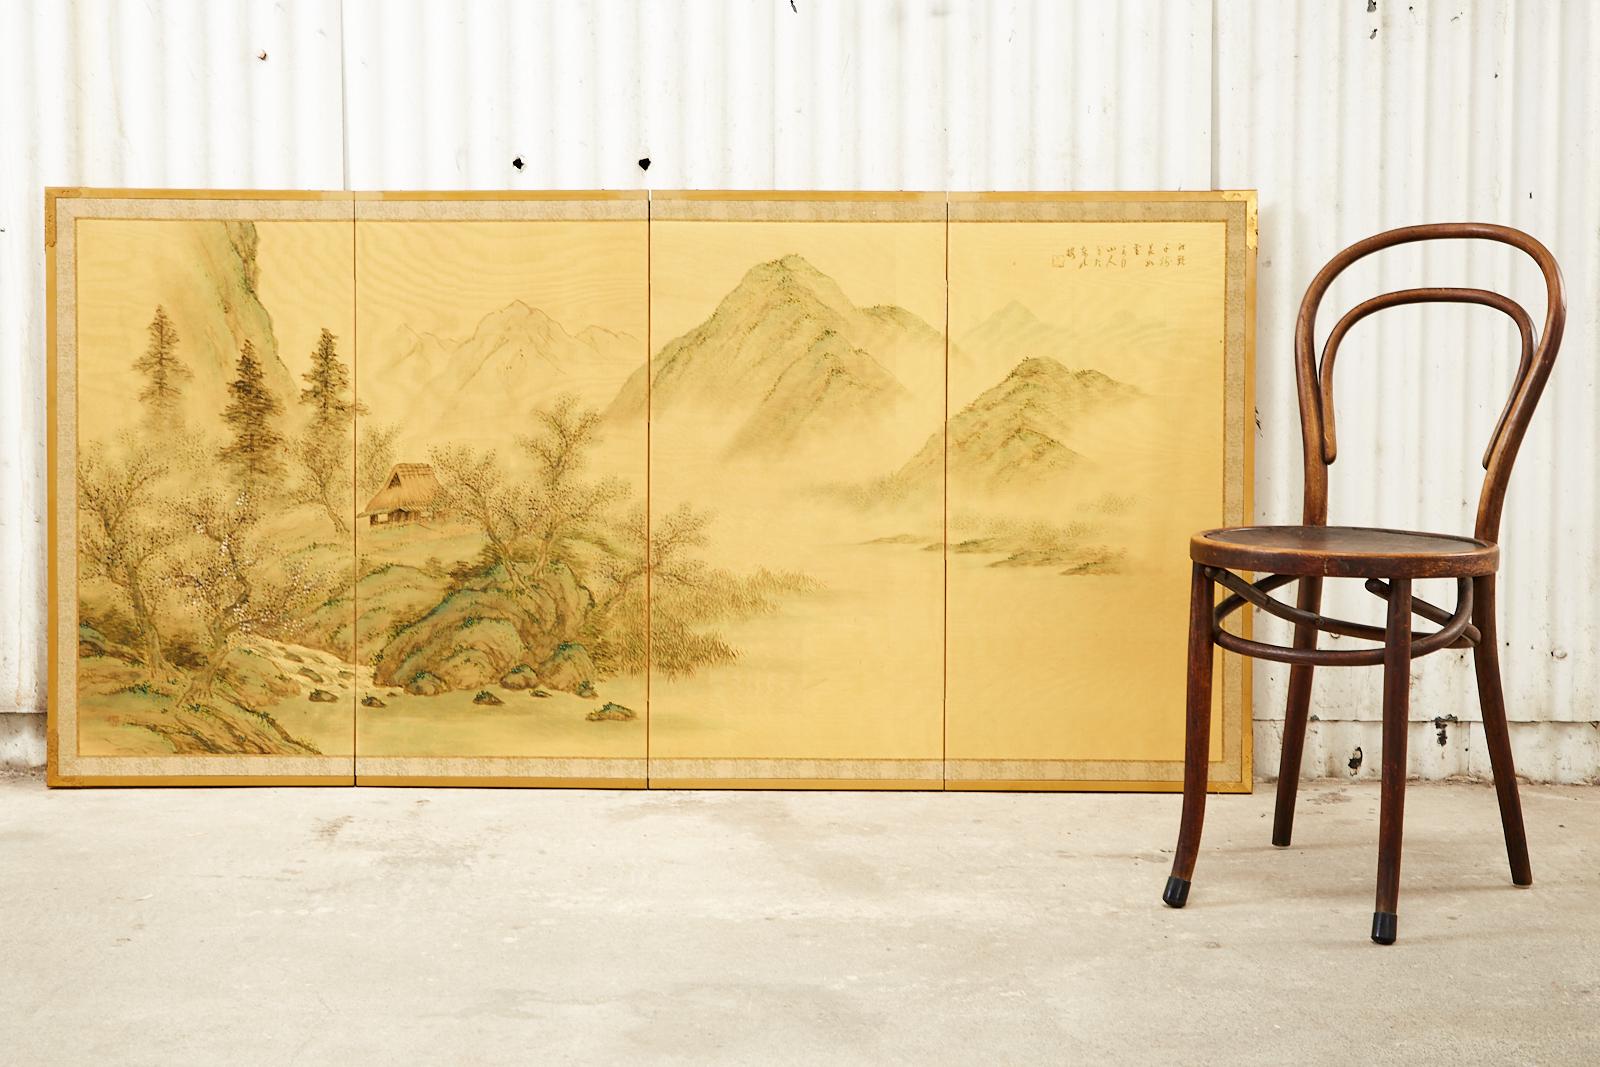 Distinctive Japanese Showa period four-panel byobu landscape screen depicting a spring mountain scene. Made in the Nihonga school style. Ink and natural color pigments painted on gilt silk and set in a giltwood frame with a silk border. Inscribed